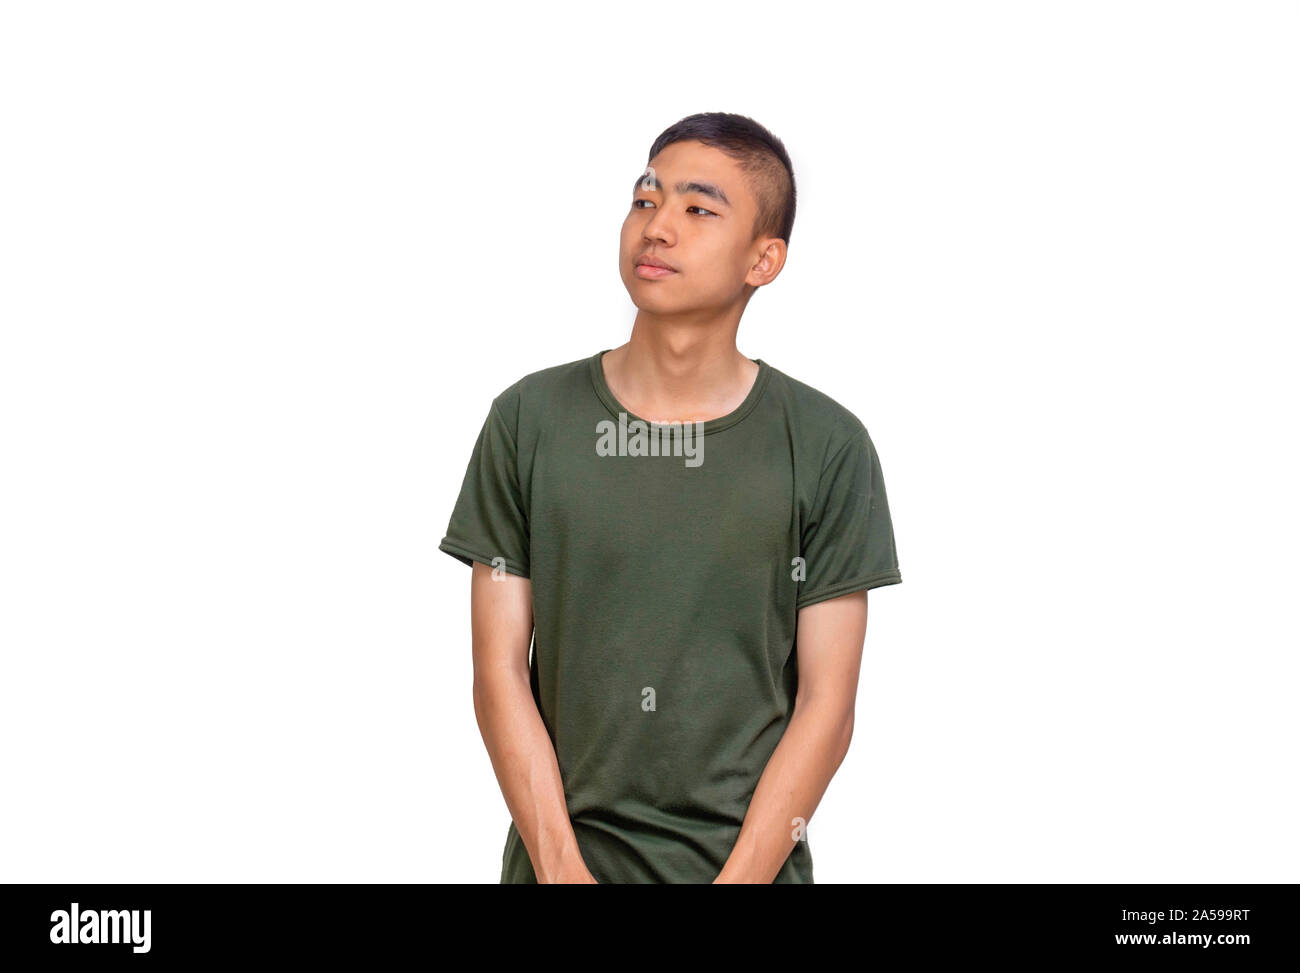 The young Thai man in shrt hair and olive green t-shirt look to his right side Stock Photo